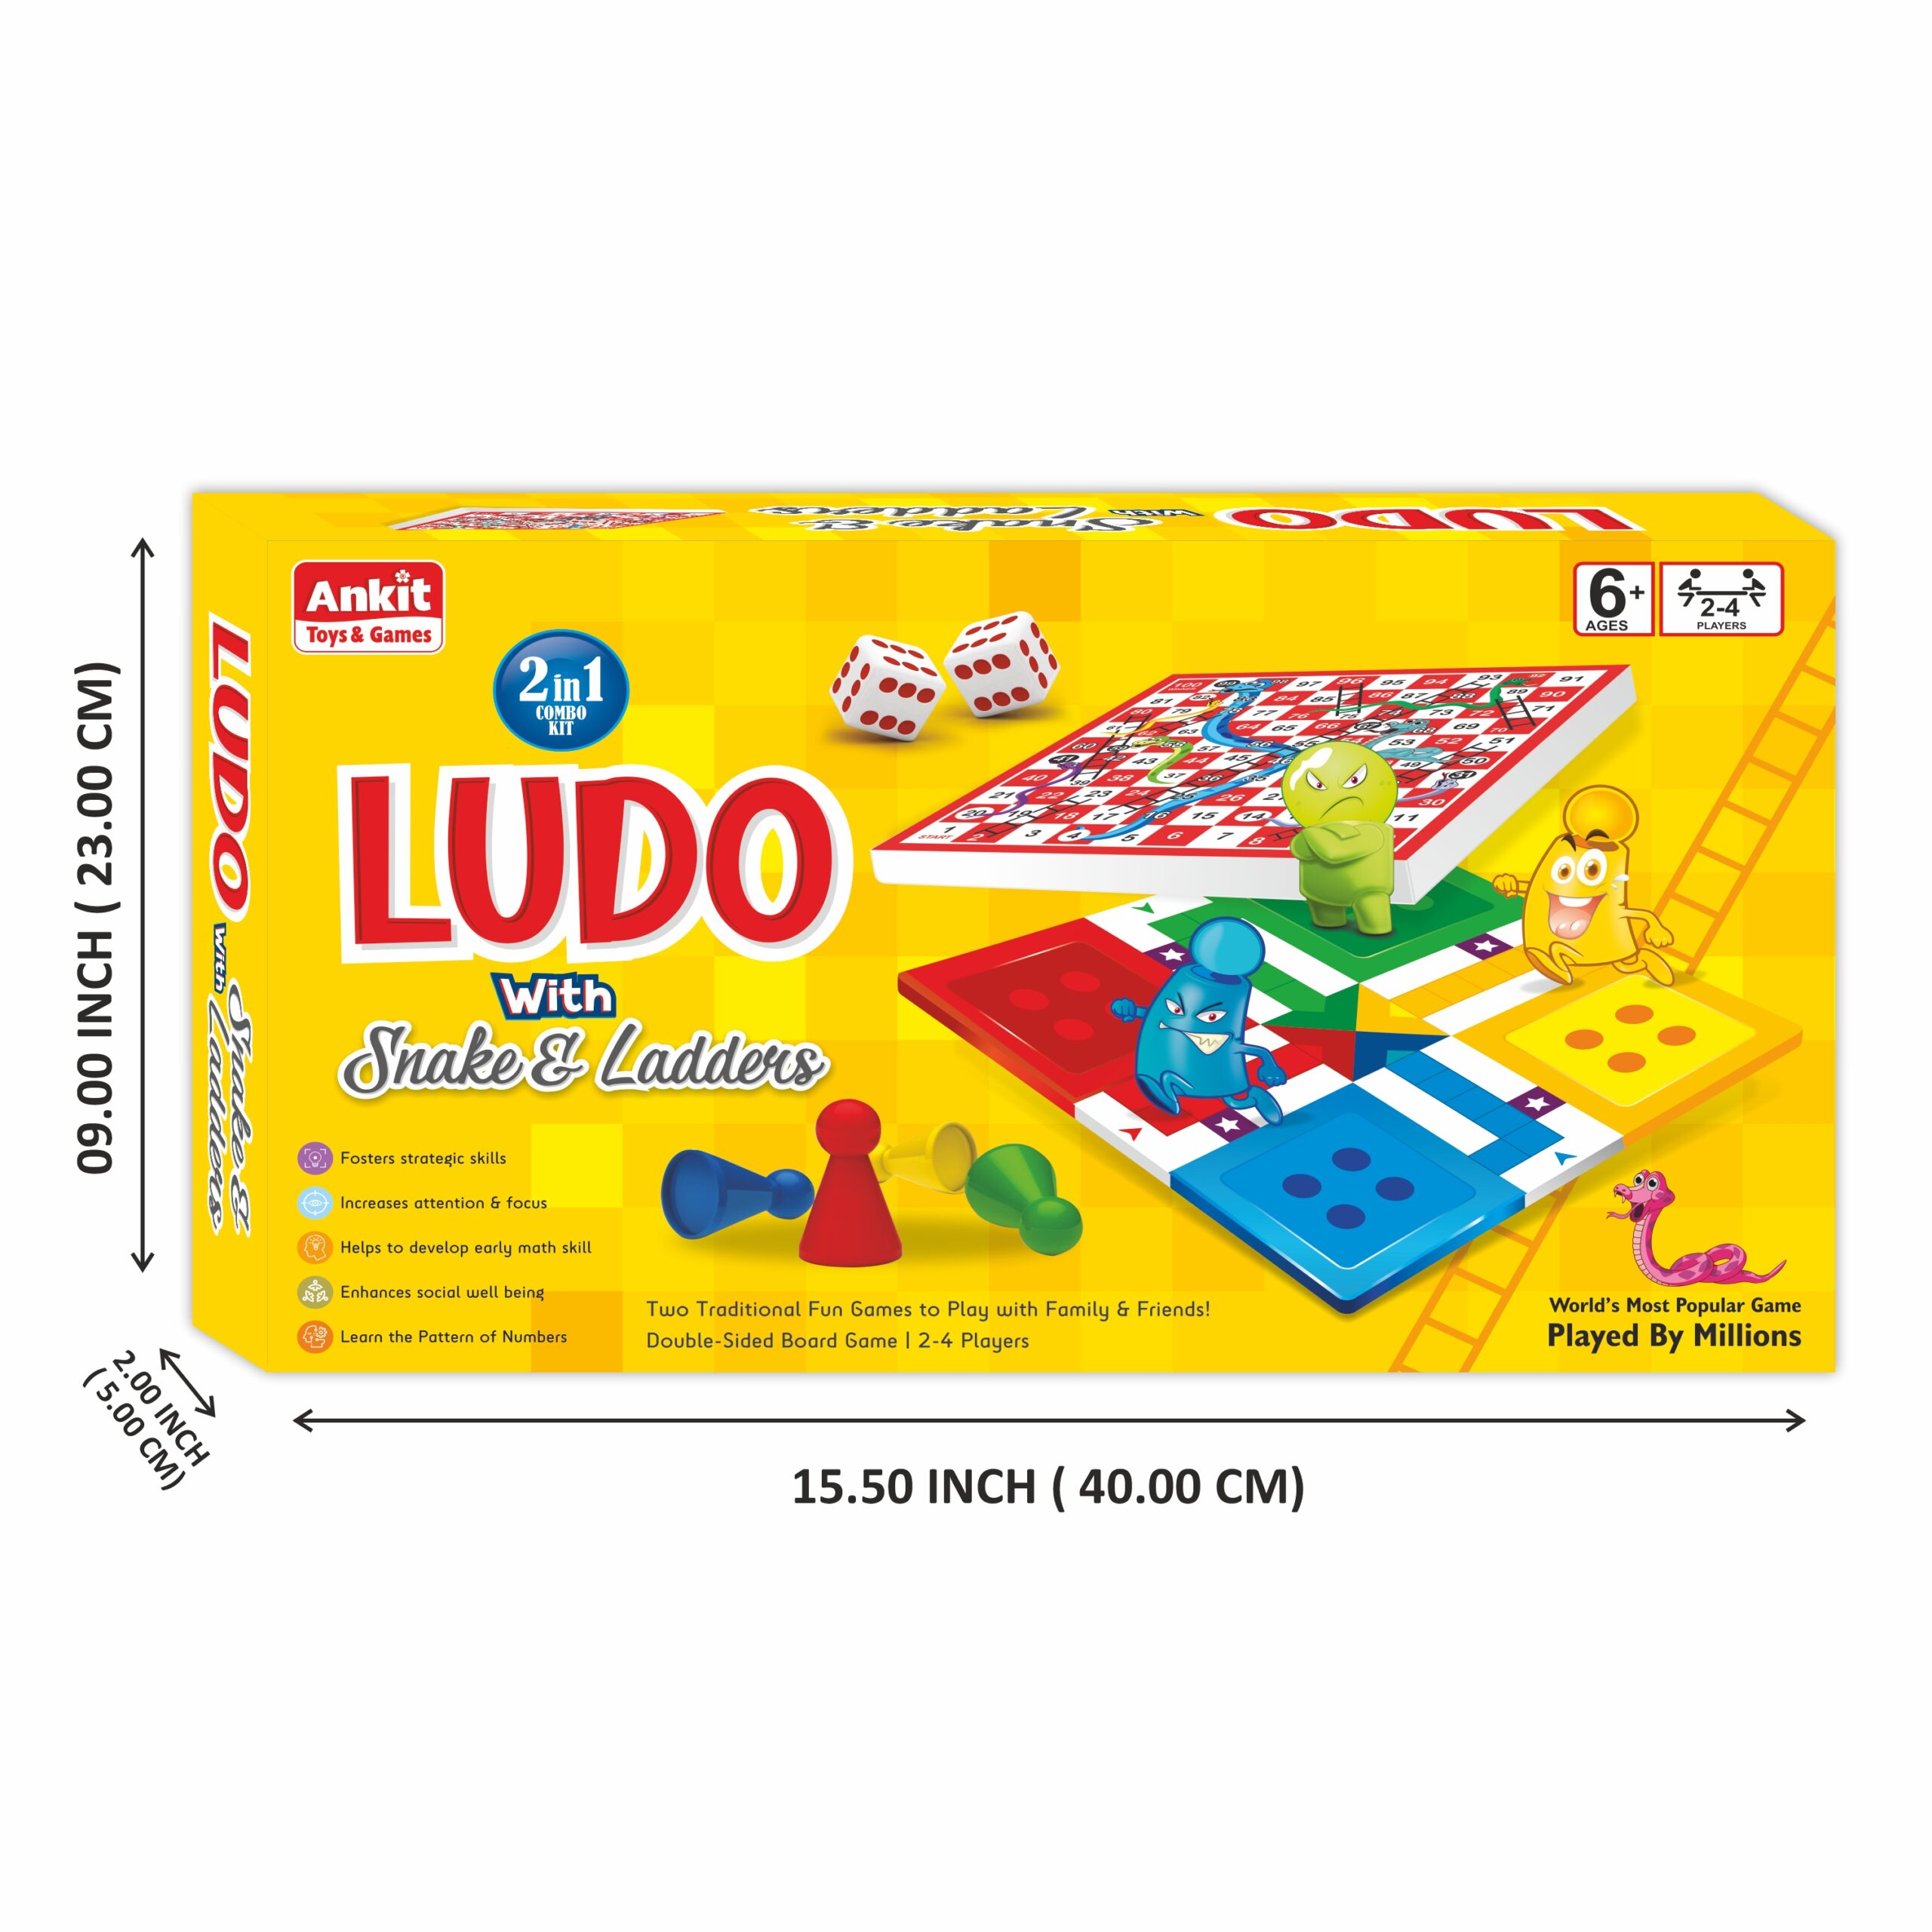 Ankit Toys 2 in 1 Ludo with Snake & Ladder Board Games